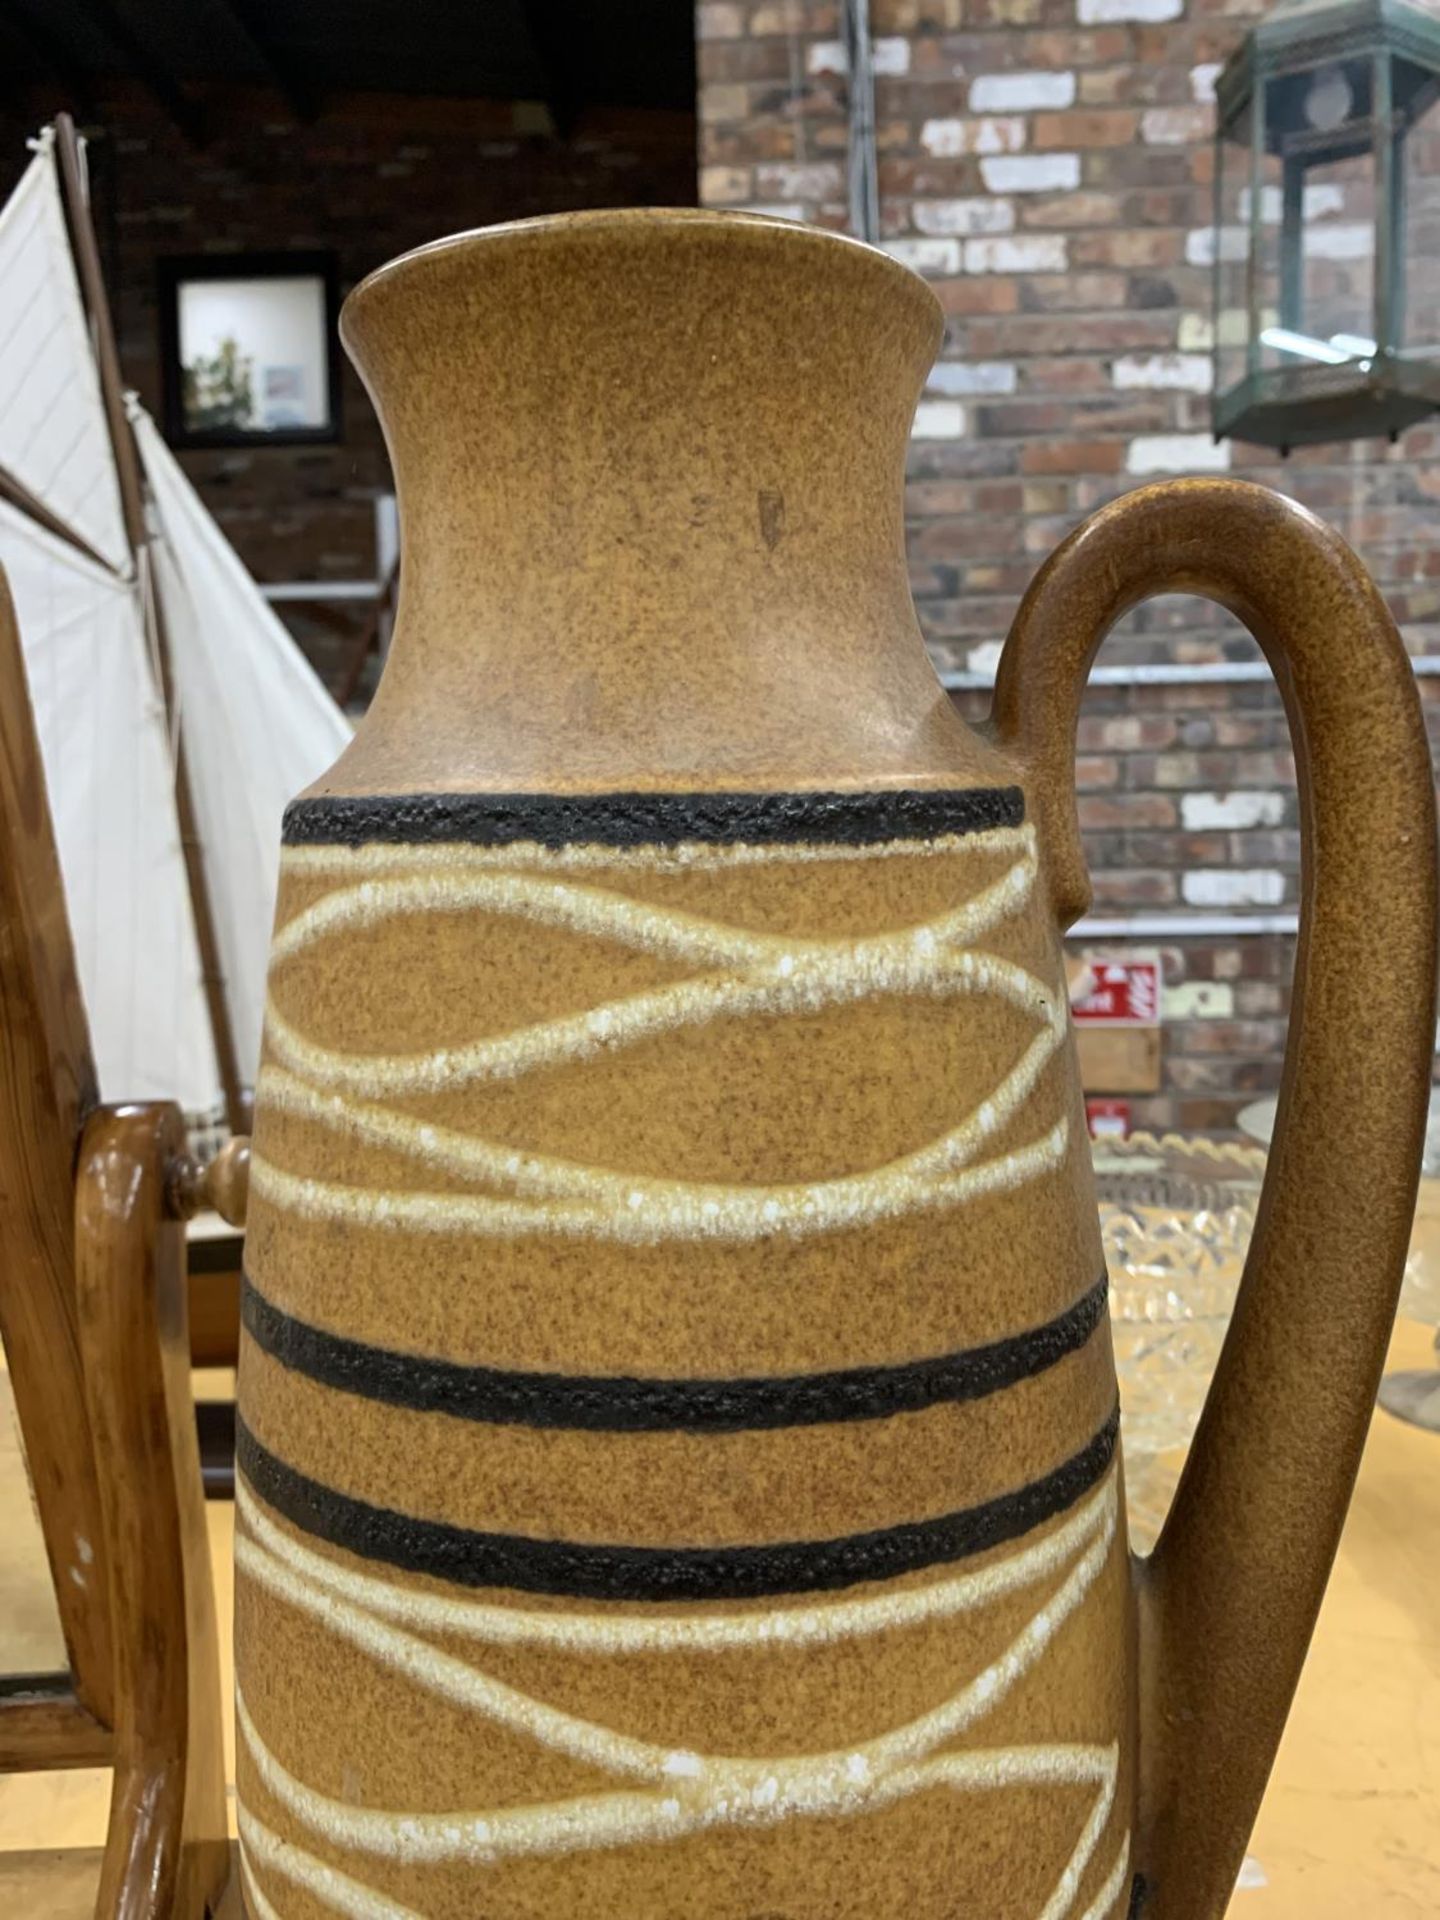 A LARGE WEST GERMAN VASE/ JUG HEIGHT APPROX 47CM - Image 2 of 2